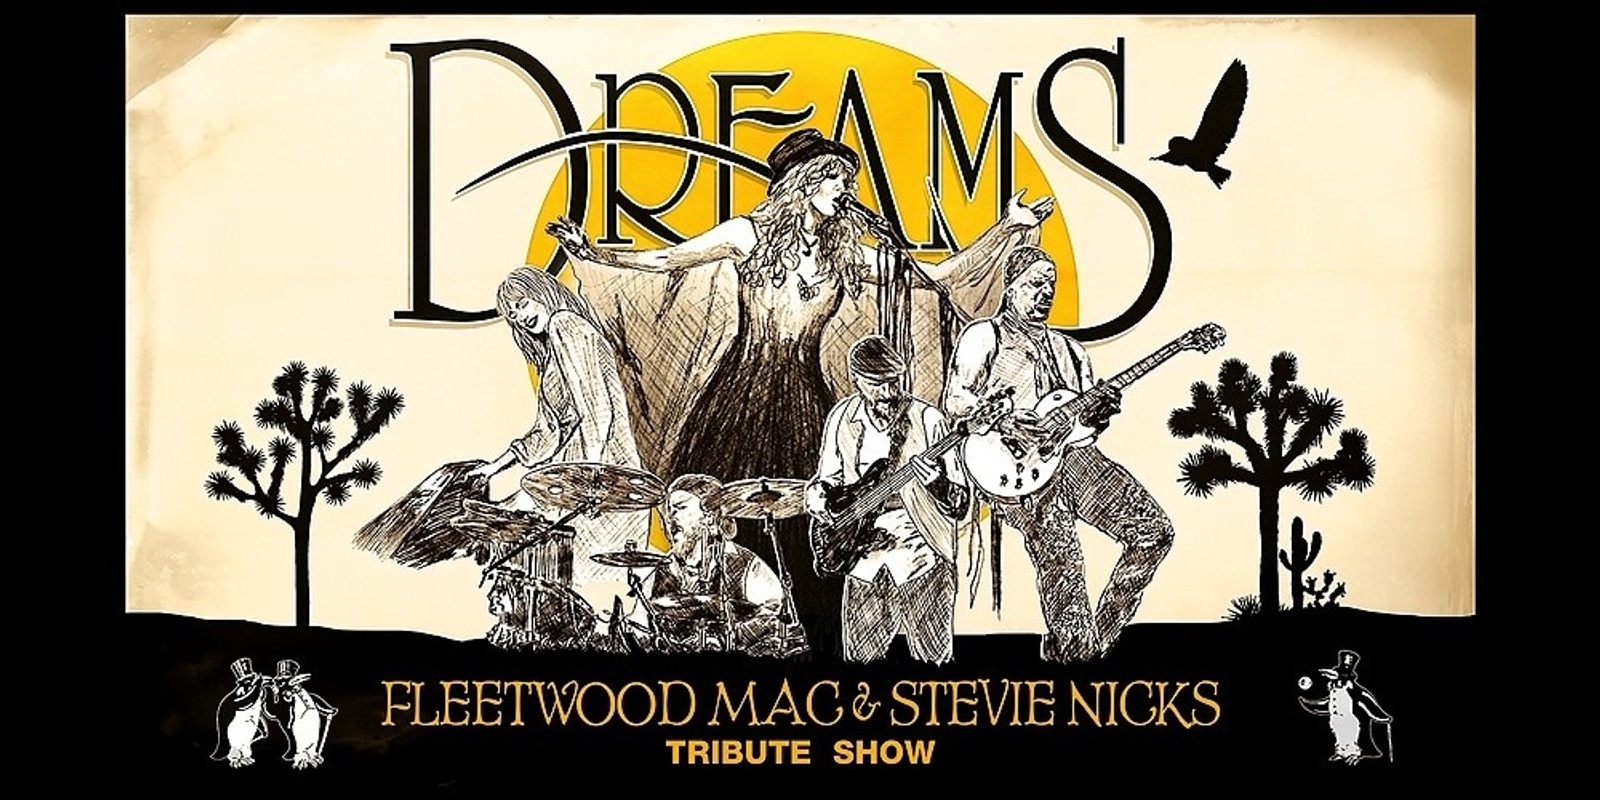 Banner image for Dreams at Lithgow Union Theatre